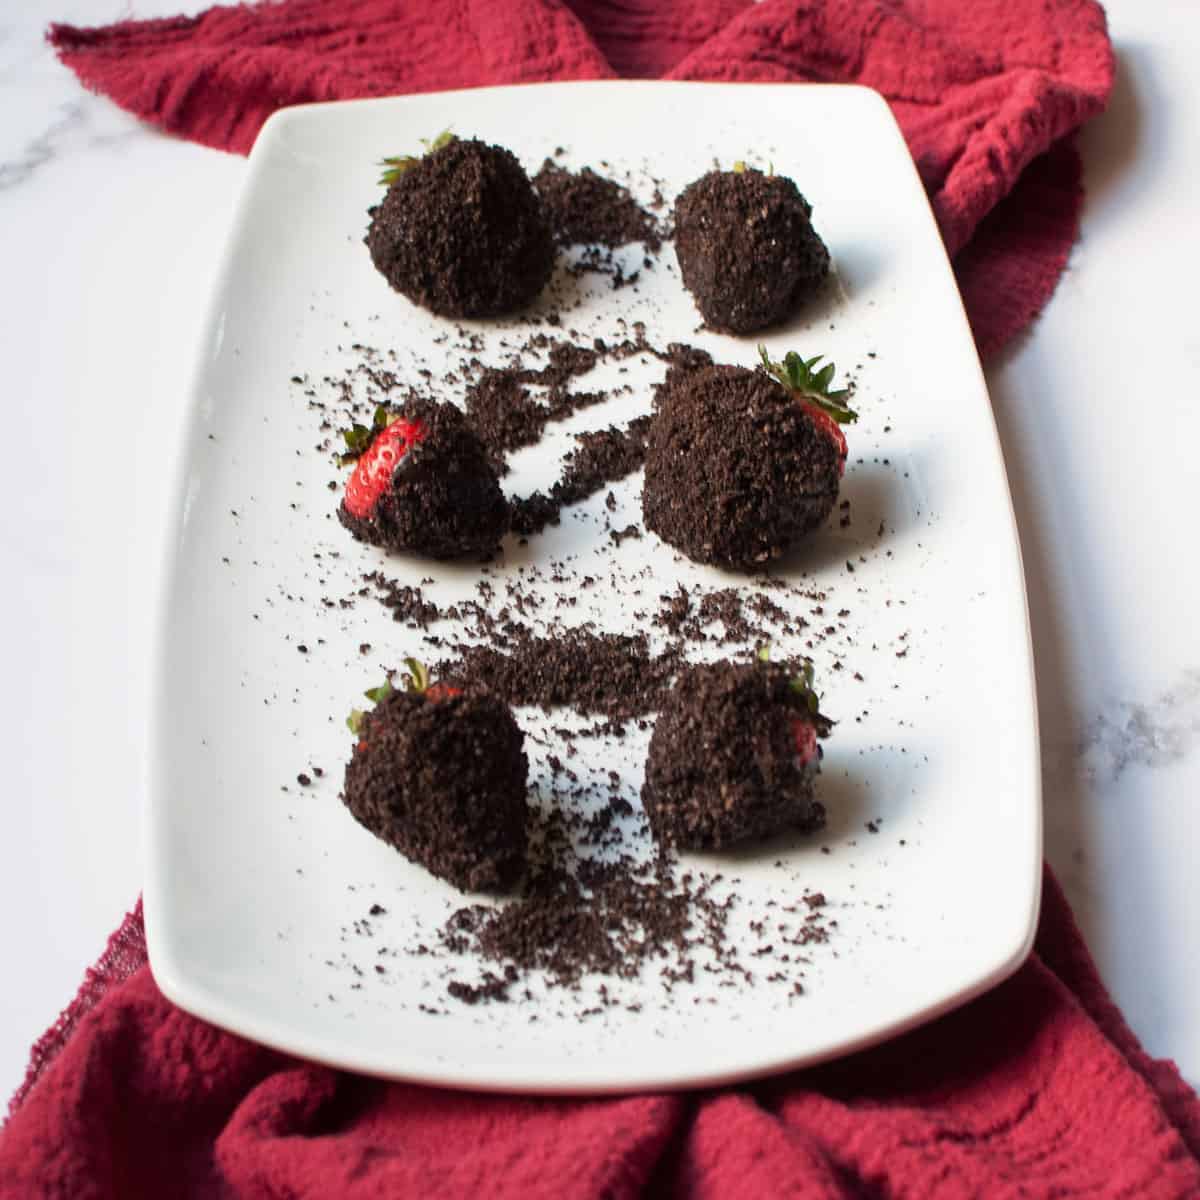 Chocolate covered strawberries rolled in crushed Oreo cookie crumbs on a white plate.